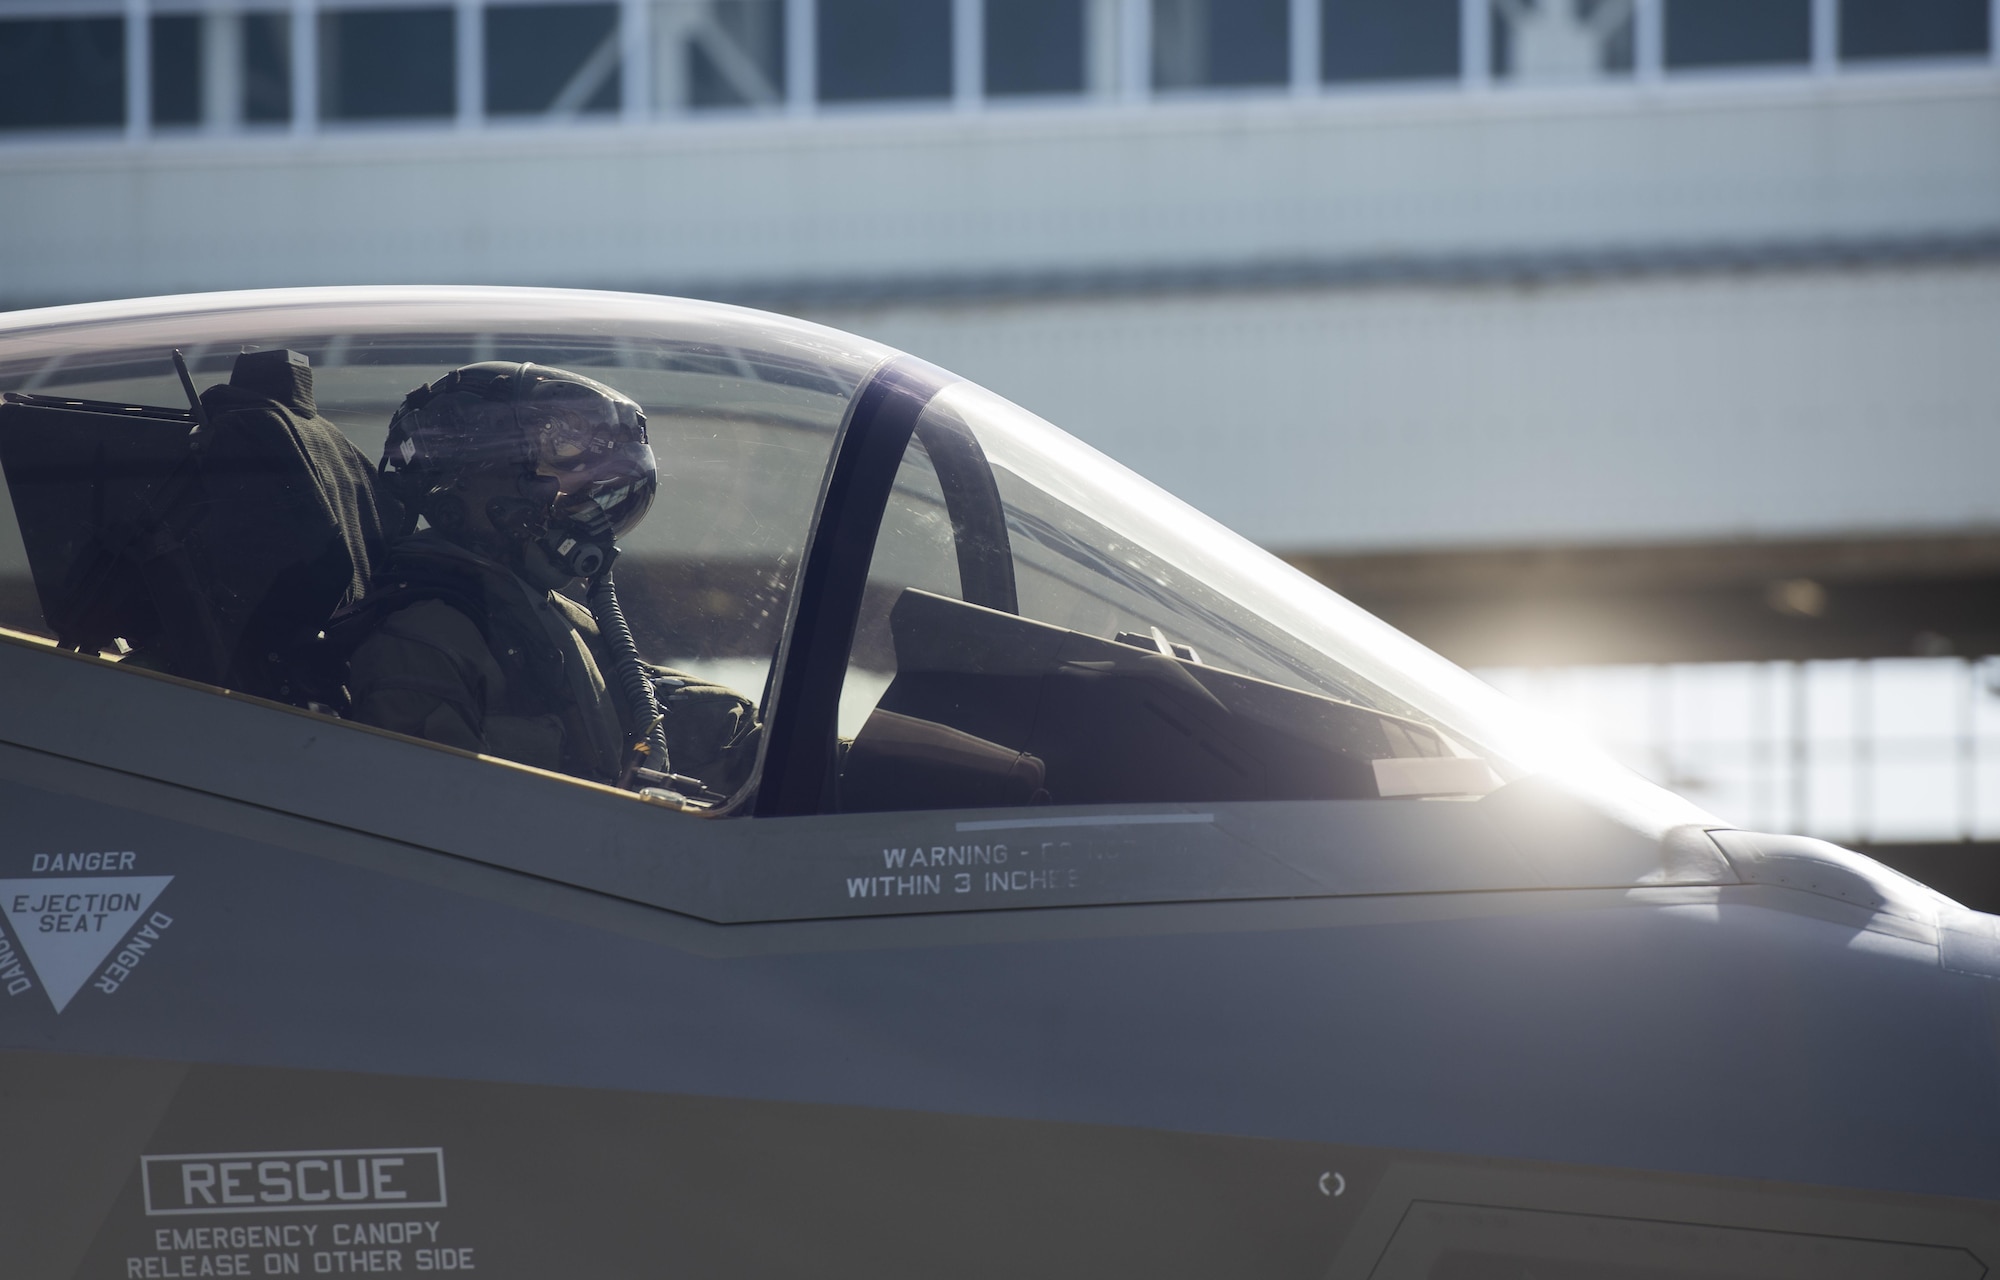 A U.S. Air Force F-35A Lightning II pilot from Hill Air Force Base, Utah, taxis for take-off at Kadena Air Base, Japan, Nov. 7, 2017. The theater security package program is designed to demonstrate the continuing U.S. commitment to stability and security in the region.  (U.S. Air Force photo by Senior Airman Omari Bernard)